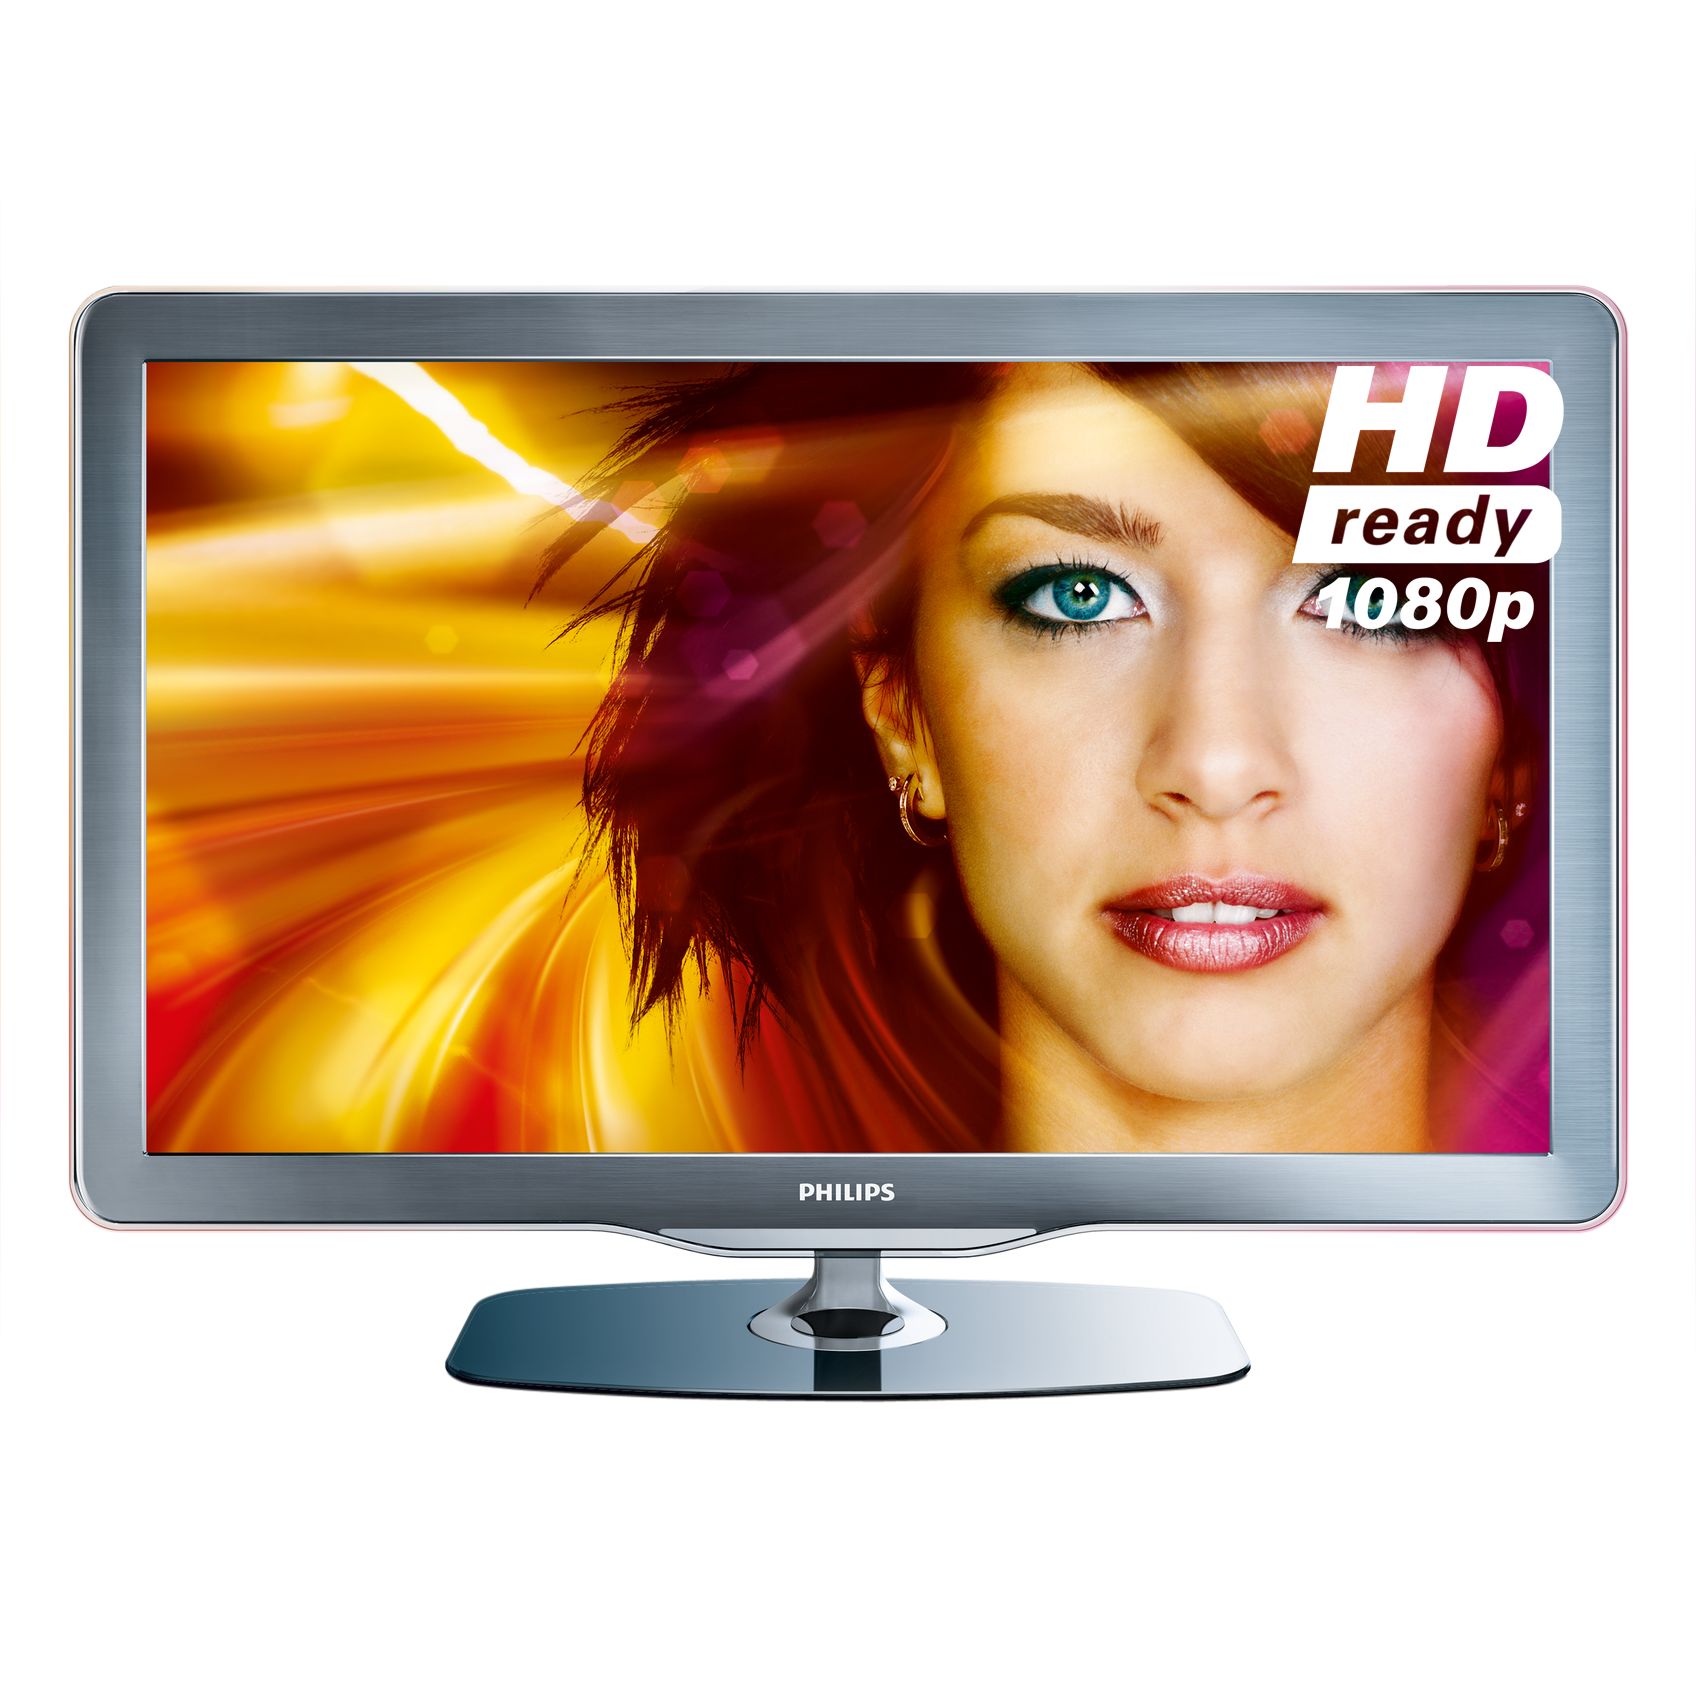 Philips 40PFL7605H/05 LCD/LED HD 1080p Digital Television, 40 Inch at JohnLewis